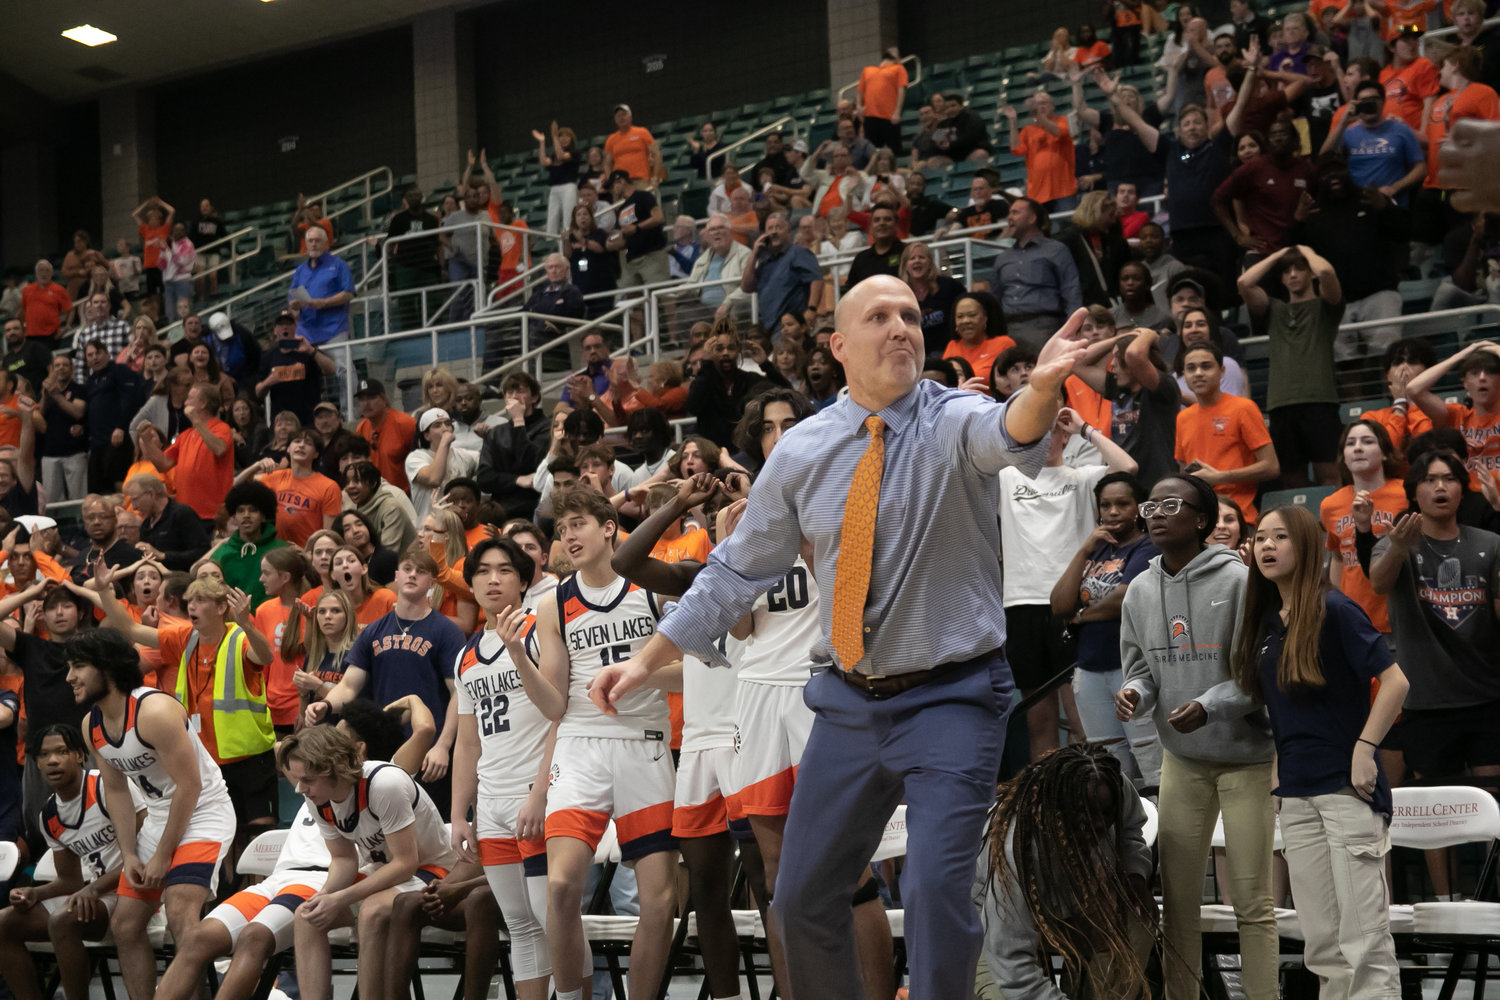 Seven Lakes head coach Shannon Heston exclaims to a referee during Monday's Class 6A Regional Quarterfinal between Seven Lakes and Stratford at the Merrell Center.